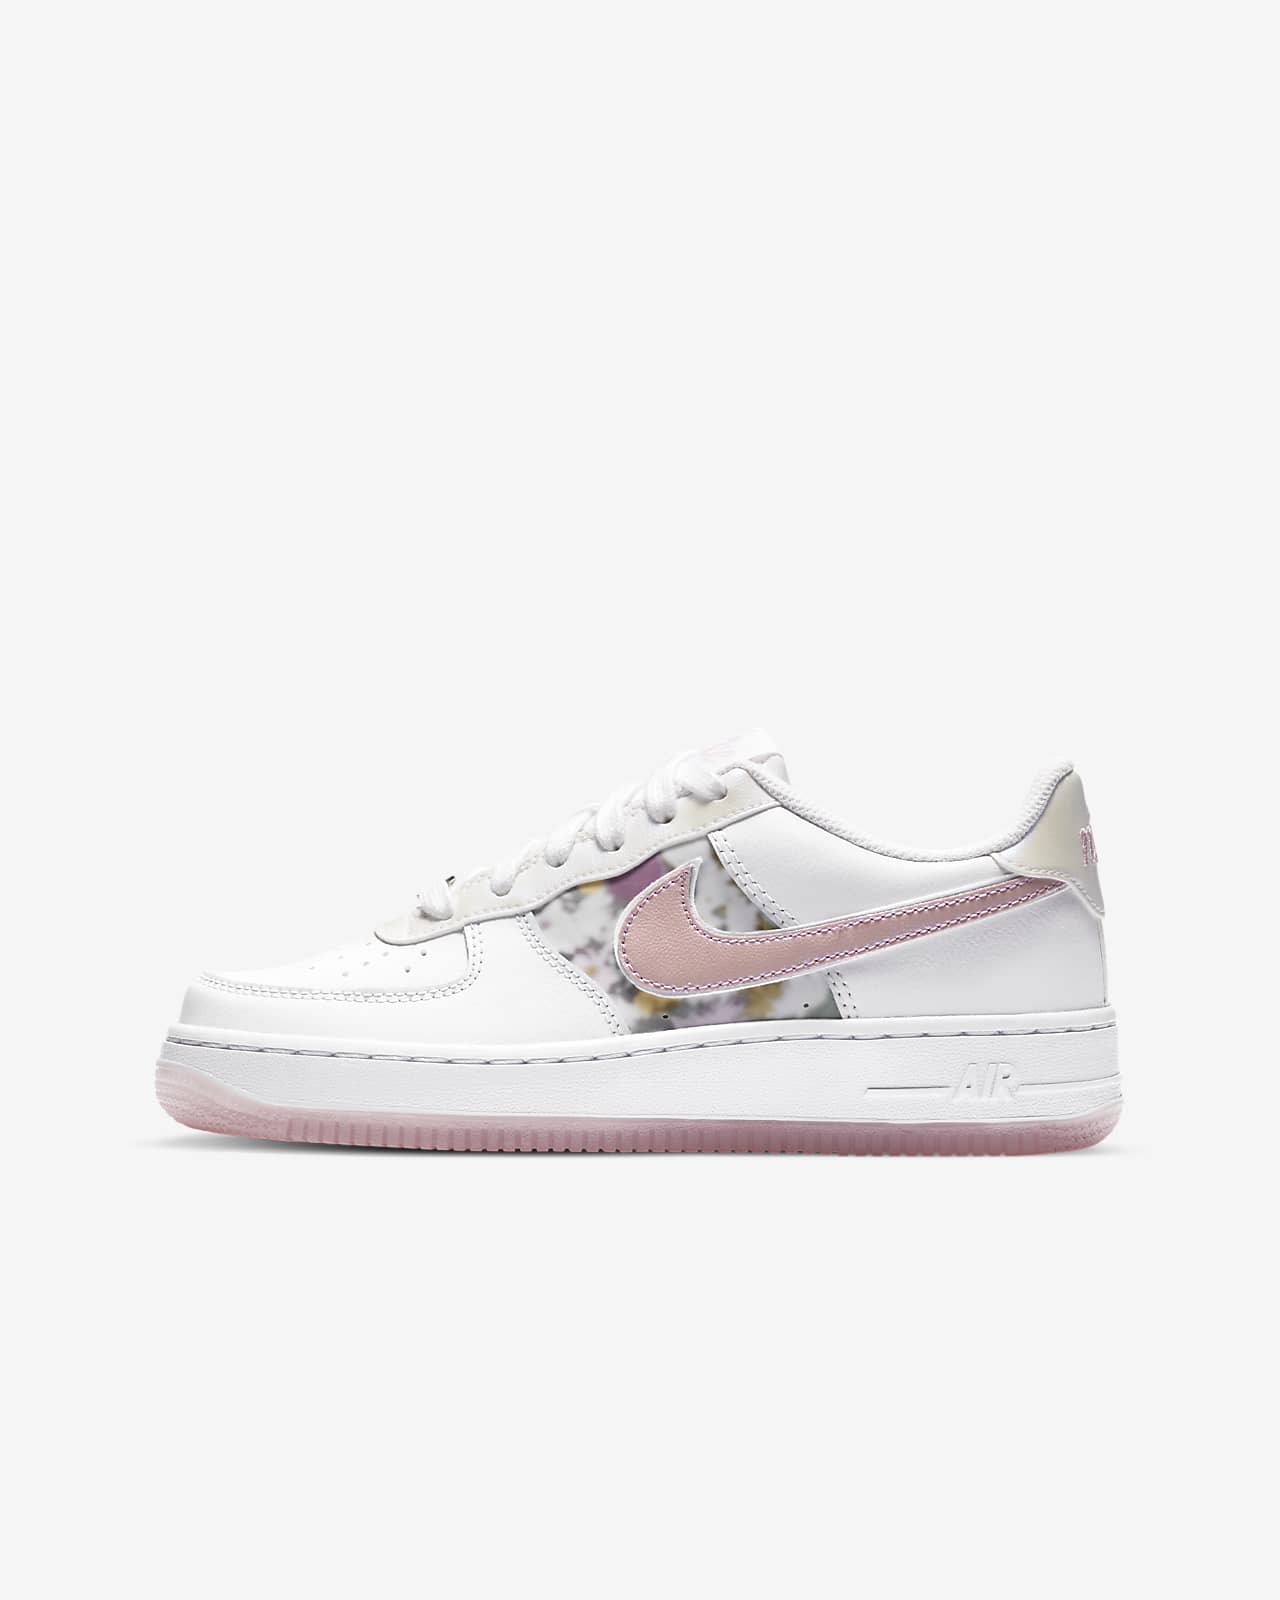 nike air force one pink